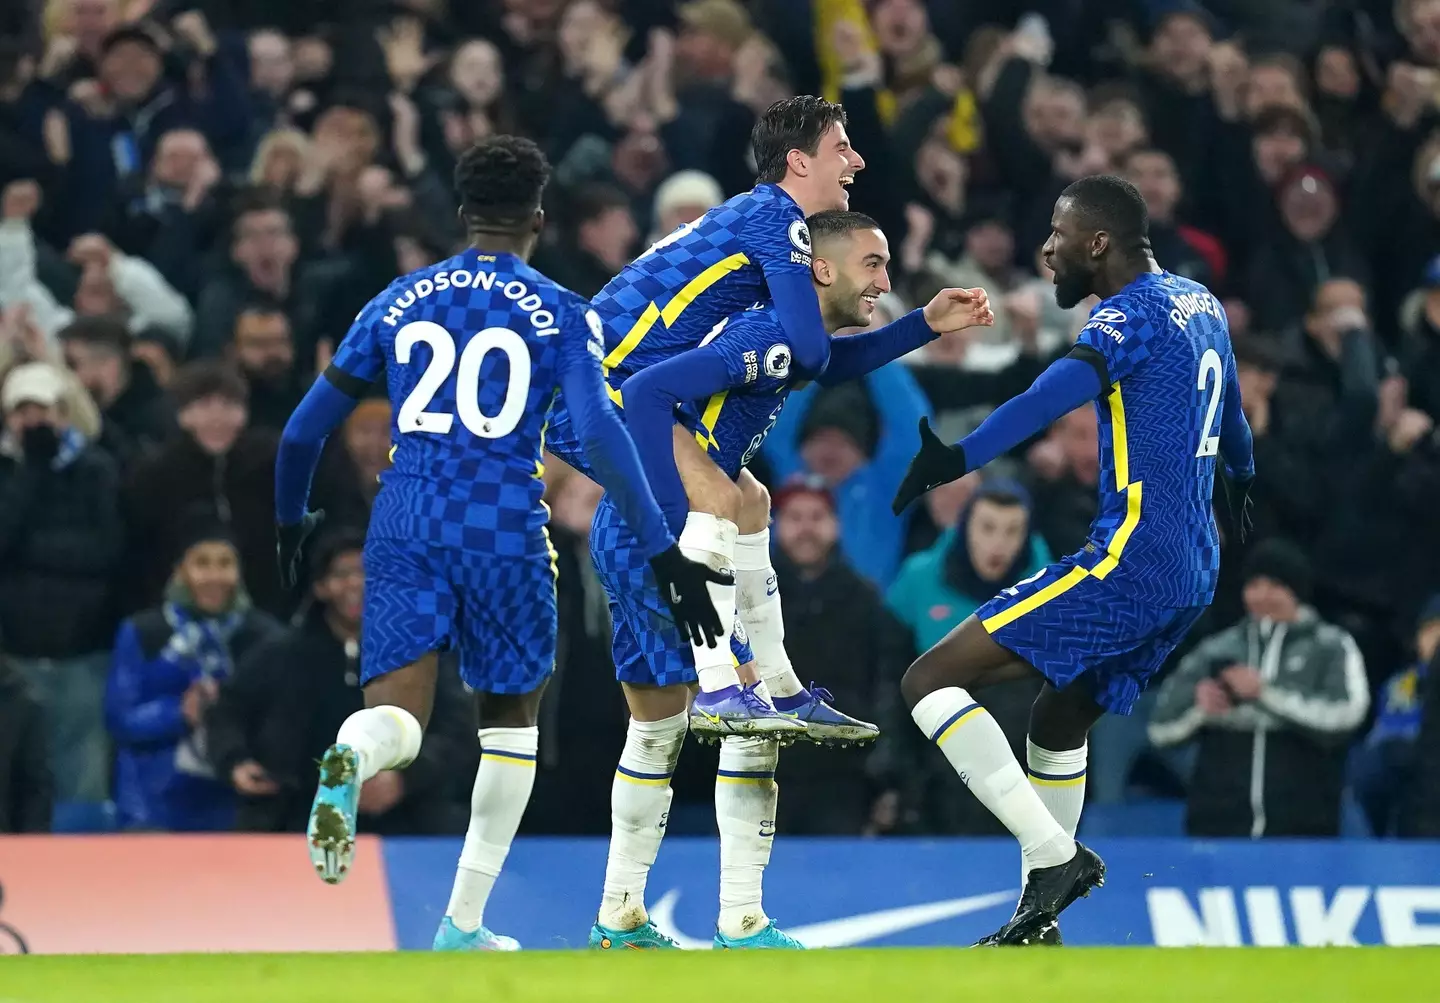 Chelsea play their opening match at the Club World Cup on February 9 (Image: Alamy)